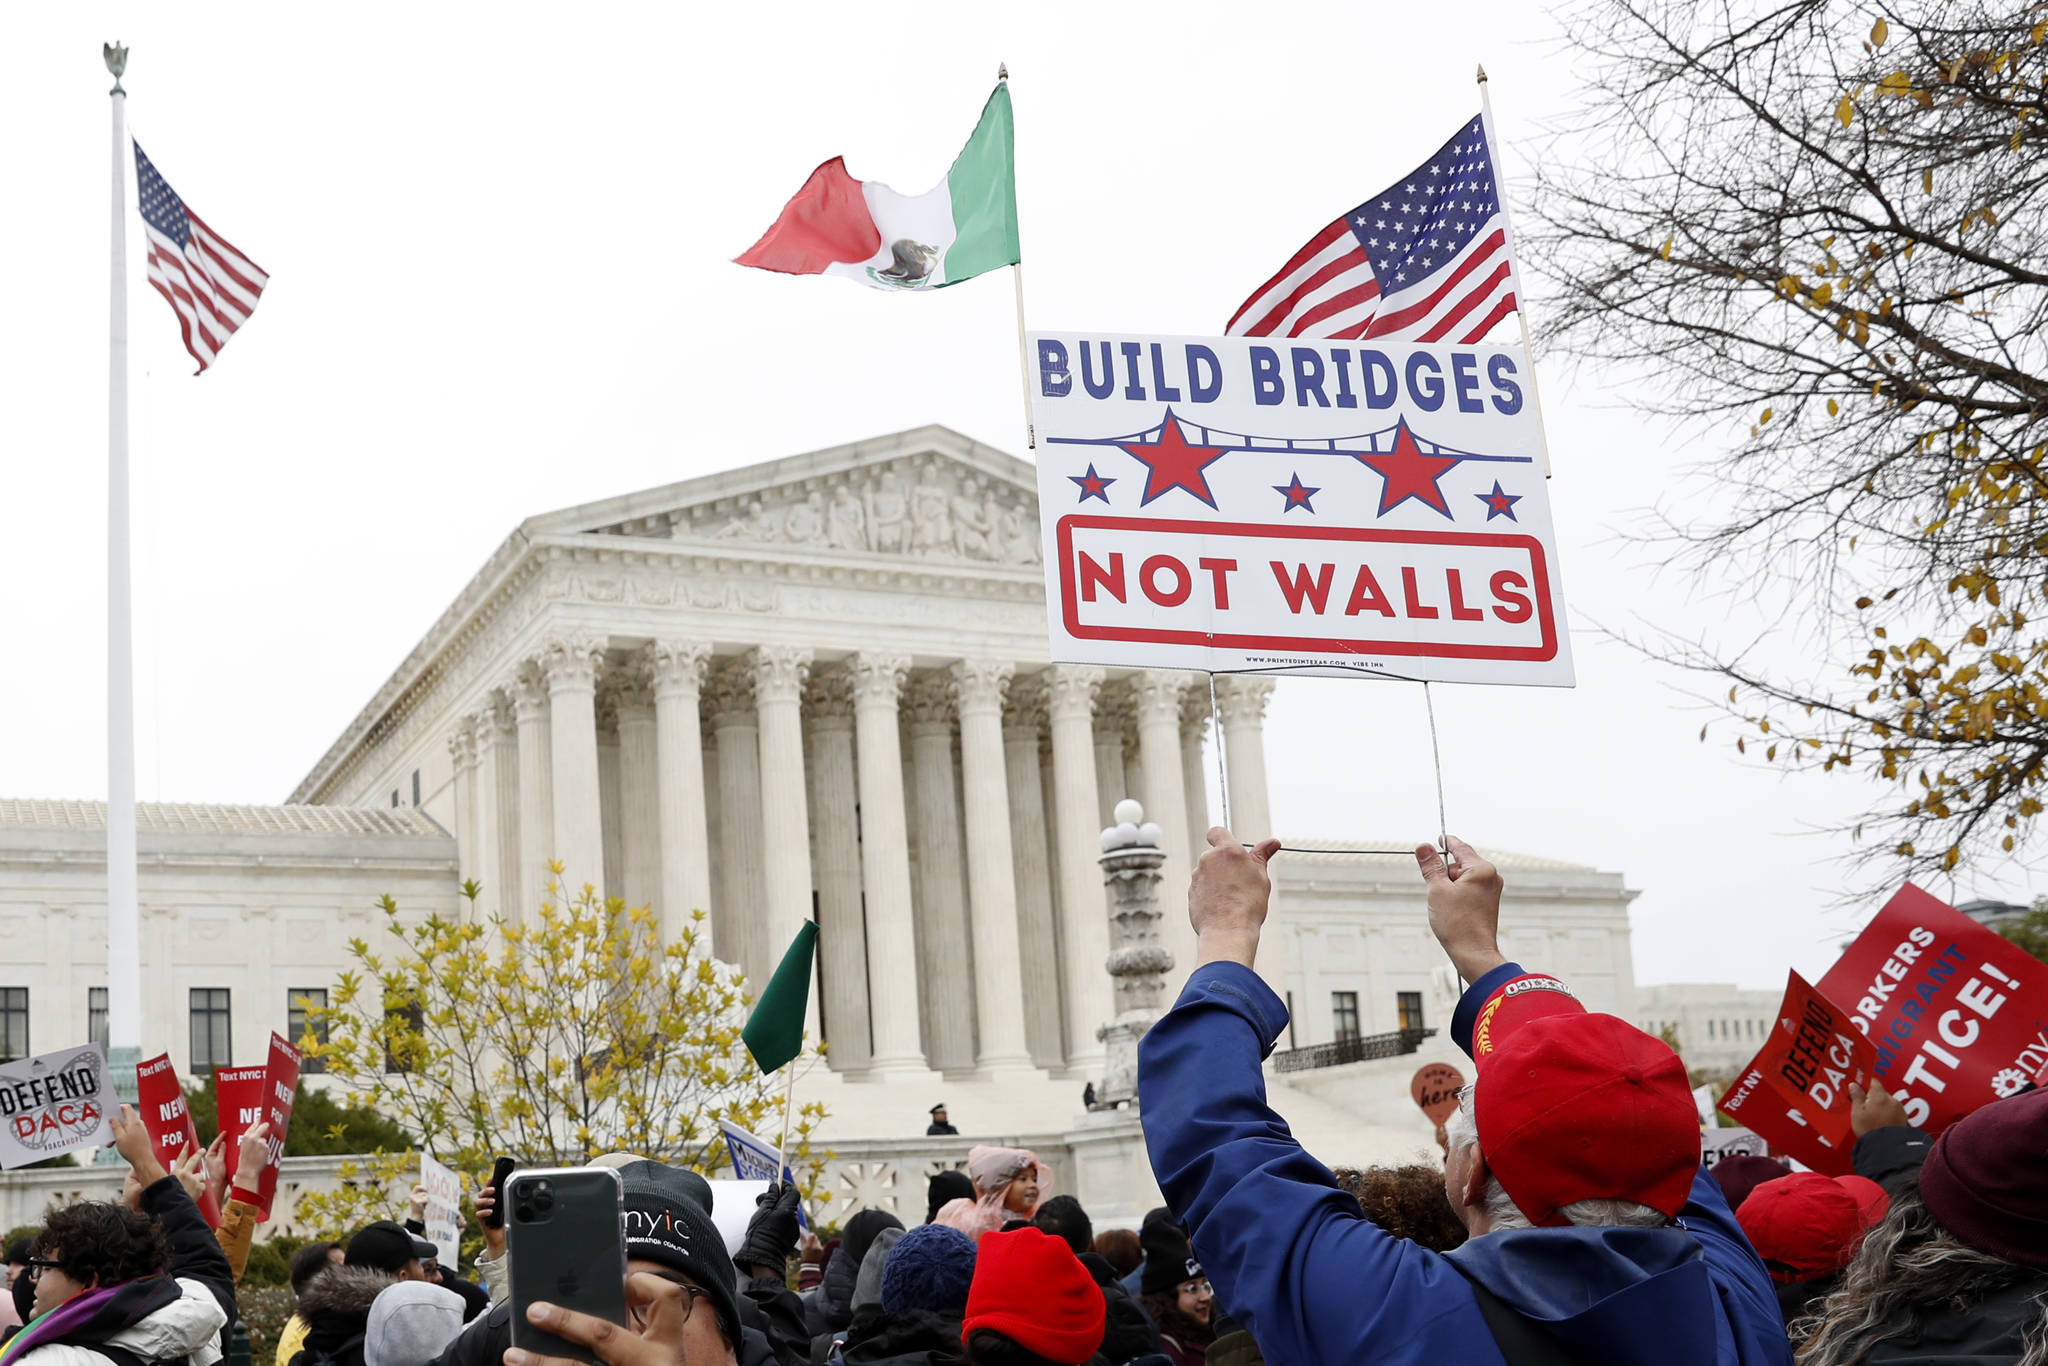 People rally outside the Supreme Court as oral arguments are heard in the case of President Trump’s decision to end the Obama-era, Deferred Action for Childhood Arrivals program (DACA), Tuesday, Nov. 12, 2019, at the Supreme Court in Washington. (AP Photo/Jacquelyn Martin)